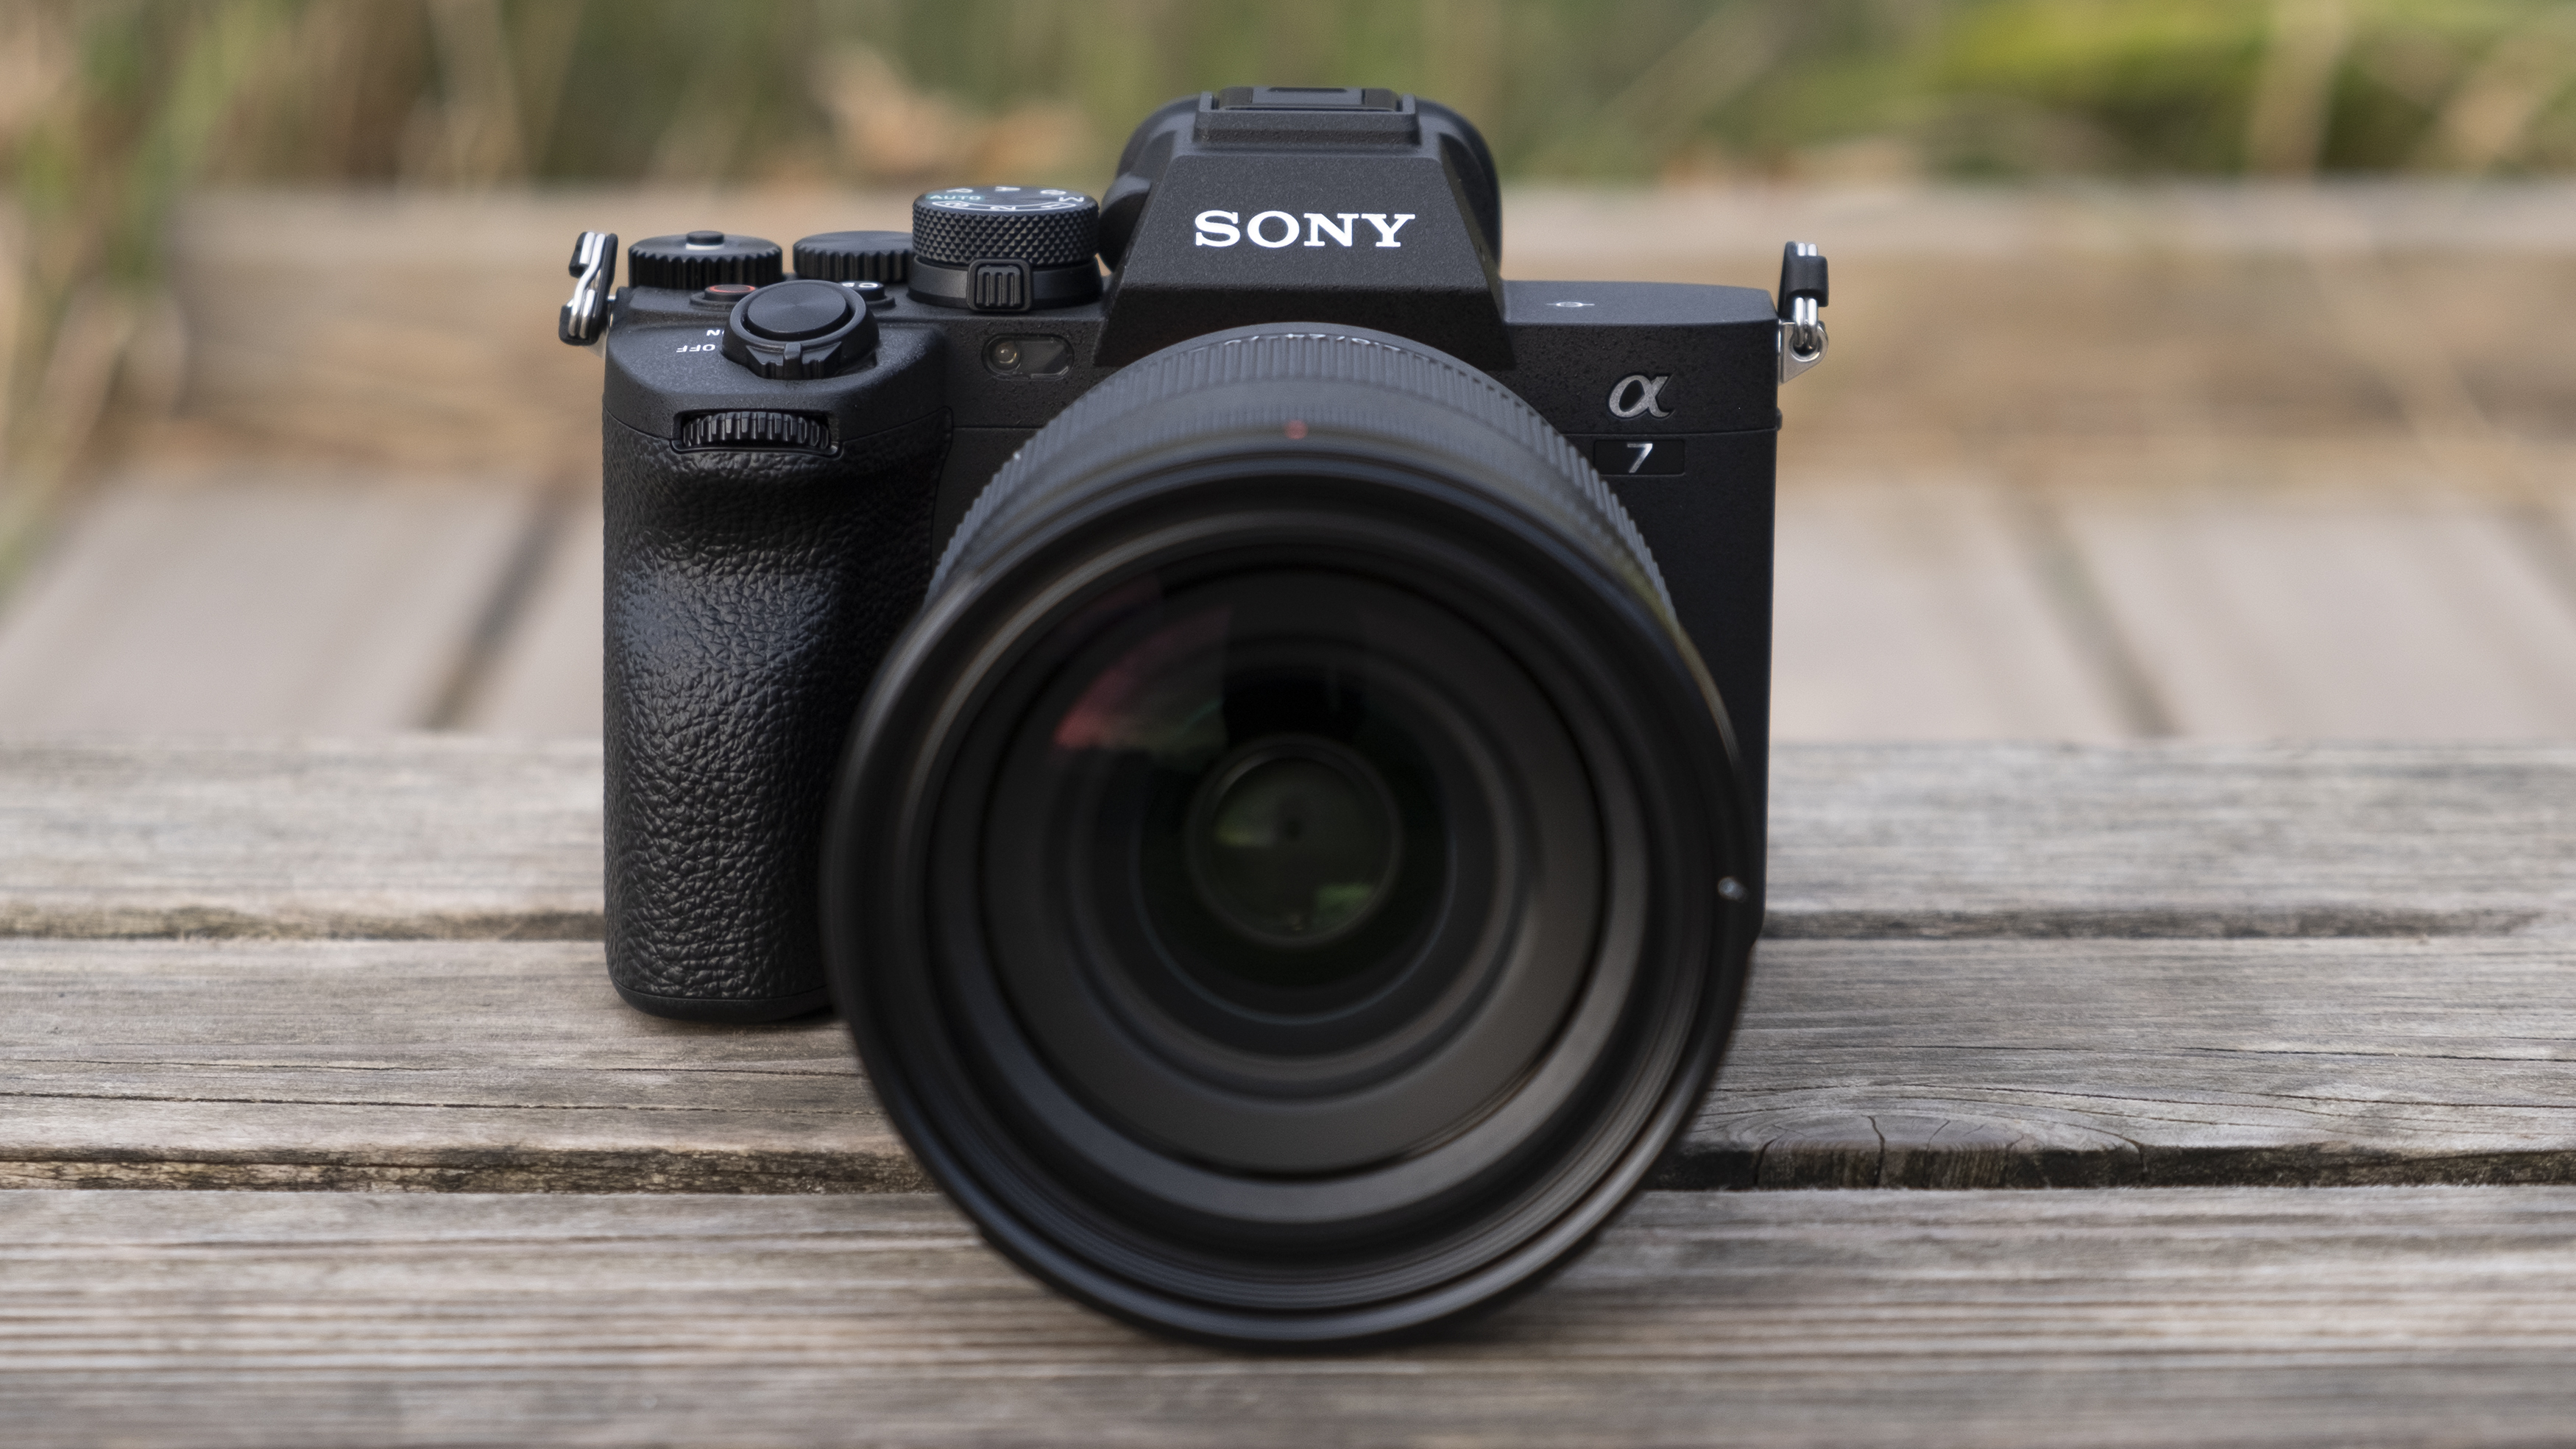 The front of the Sony A7 IV camera with a zoom lens